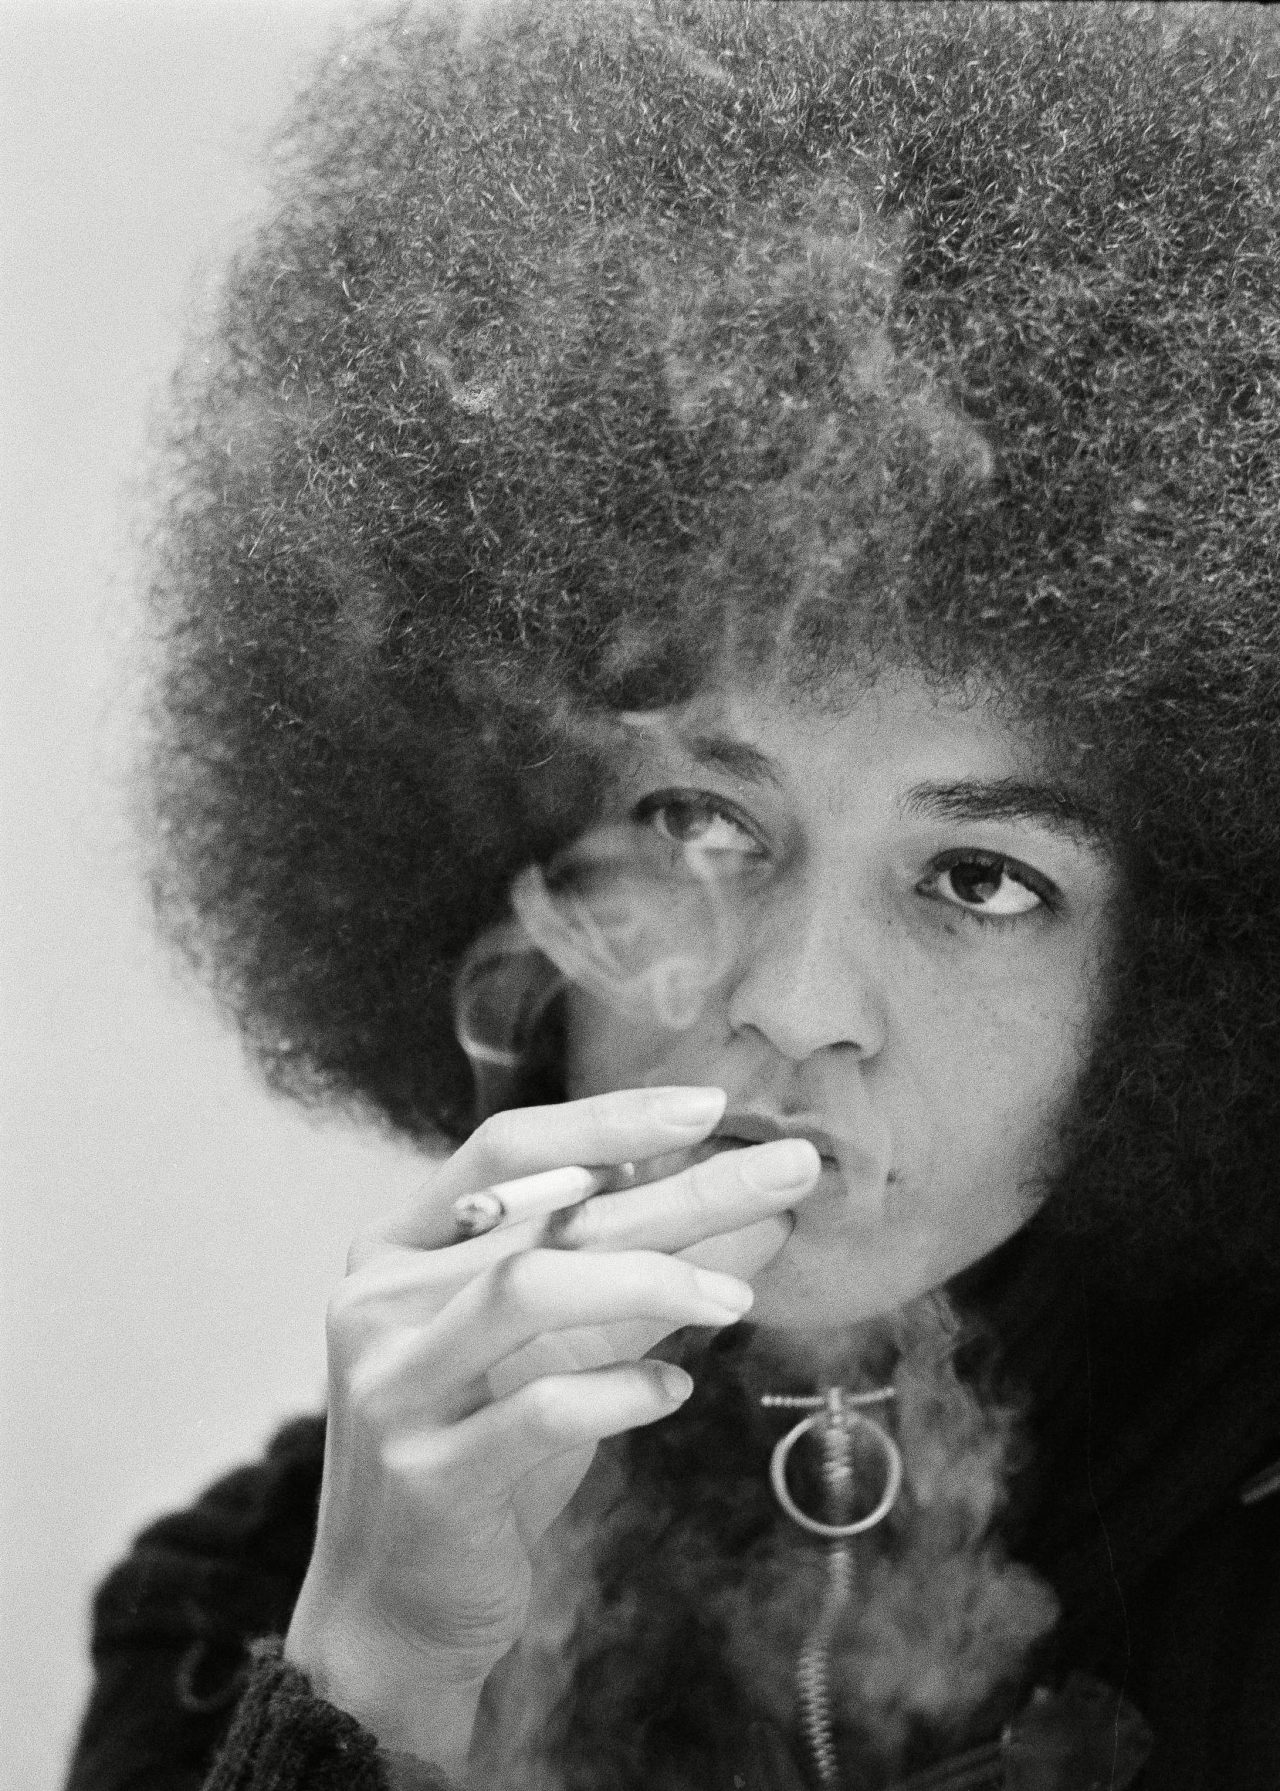 Angela Davis Angela Davis, black Communist jailed for more than a year on murder-conspiracy charges resulting from San Rafael courthouse slaying of a judge and three others, has a cigarette as she talks during an exclusive interview with Associated Press reporters Edith Lederer and Jeannine Yoemans in tiny green interview room at Santa Clara County jail at Palo Alto 27 Dec 1971